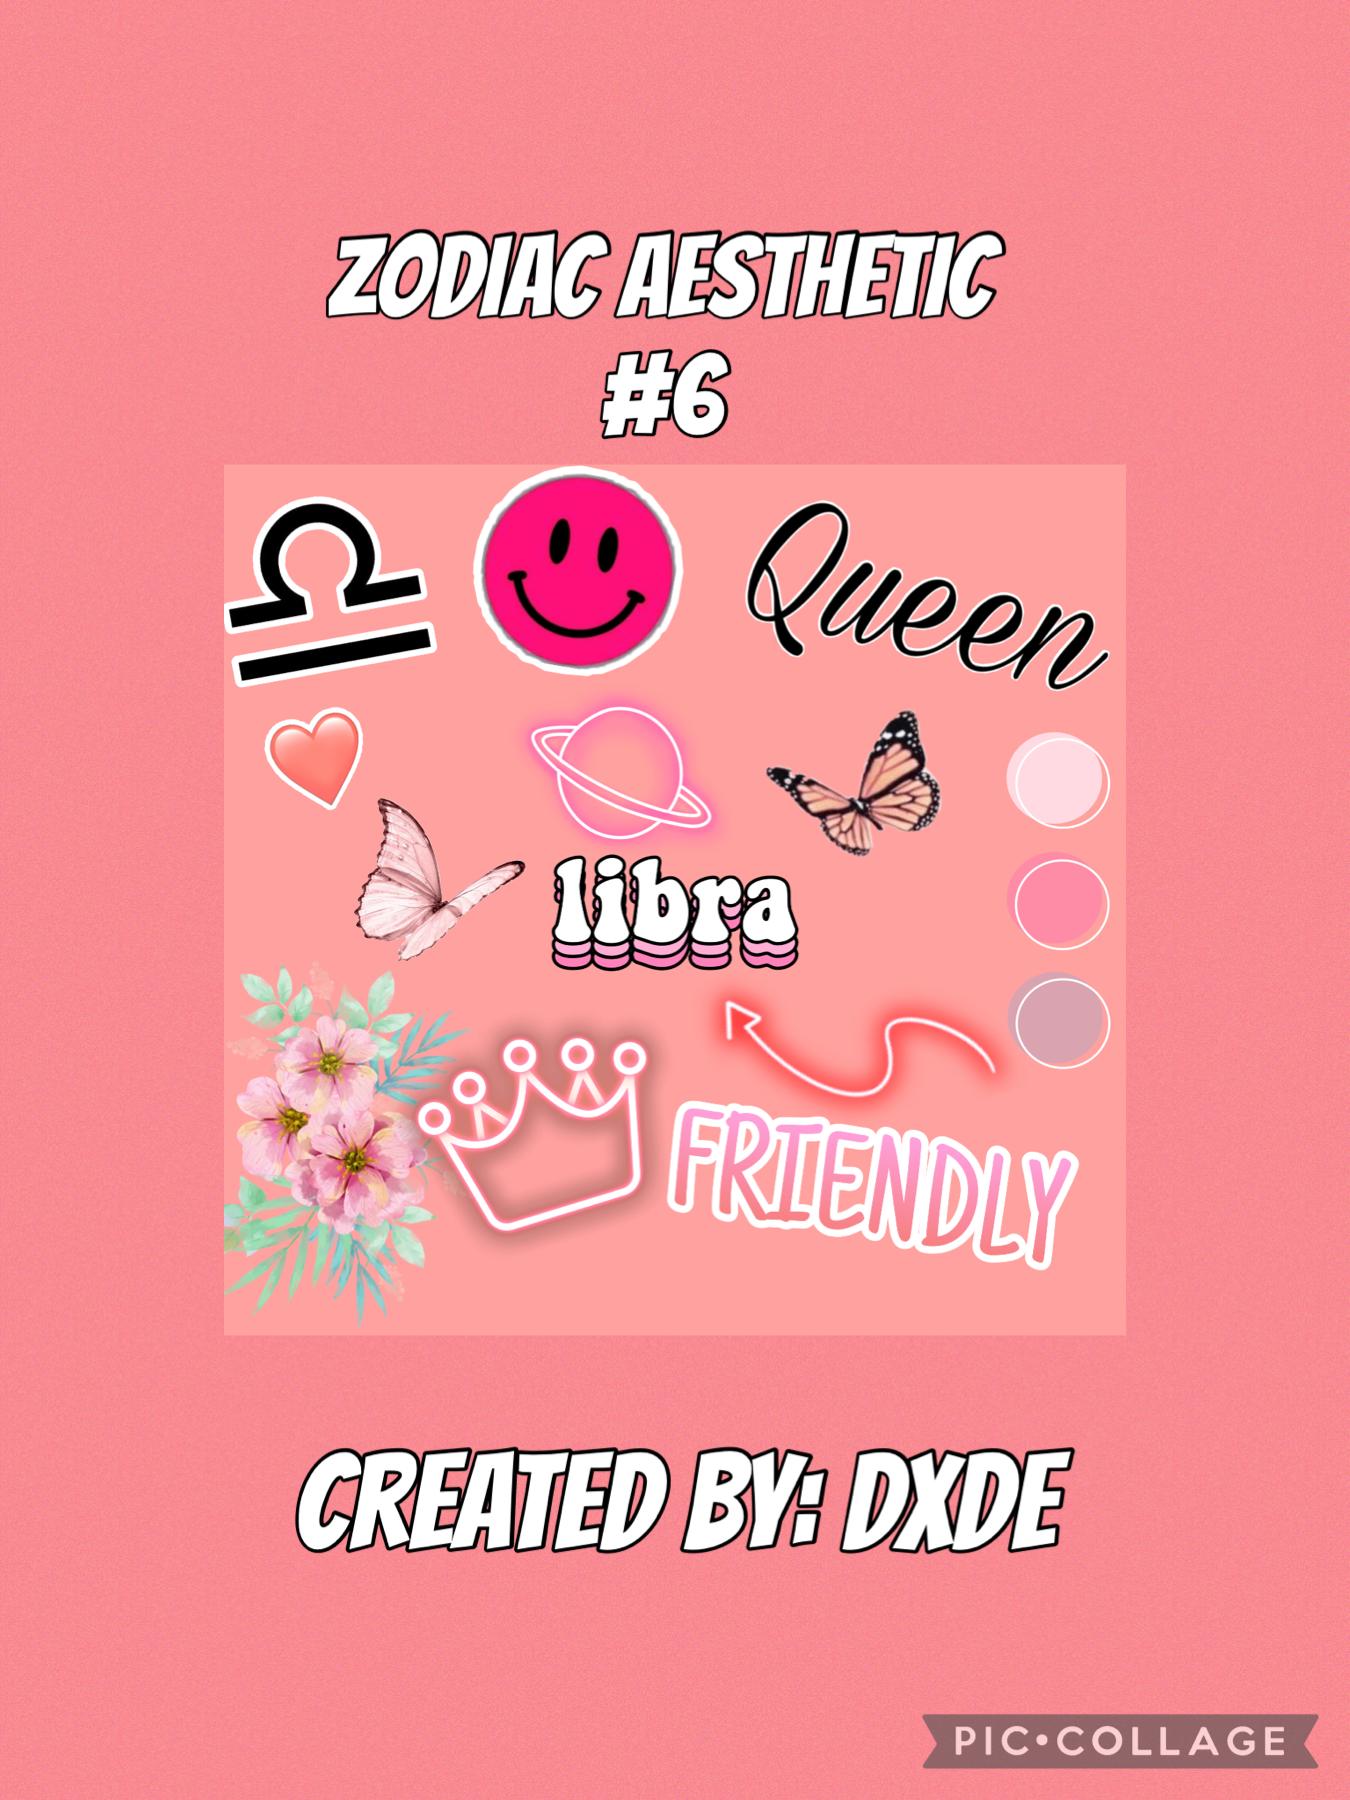 Enjoy this Aesthetic, Different Zodiacs coming soon! #libra♎️